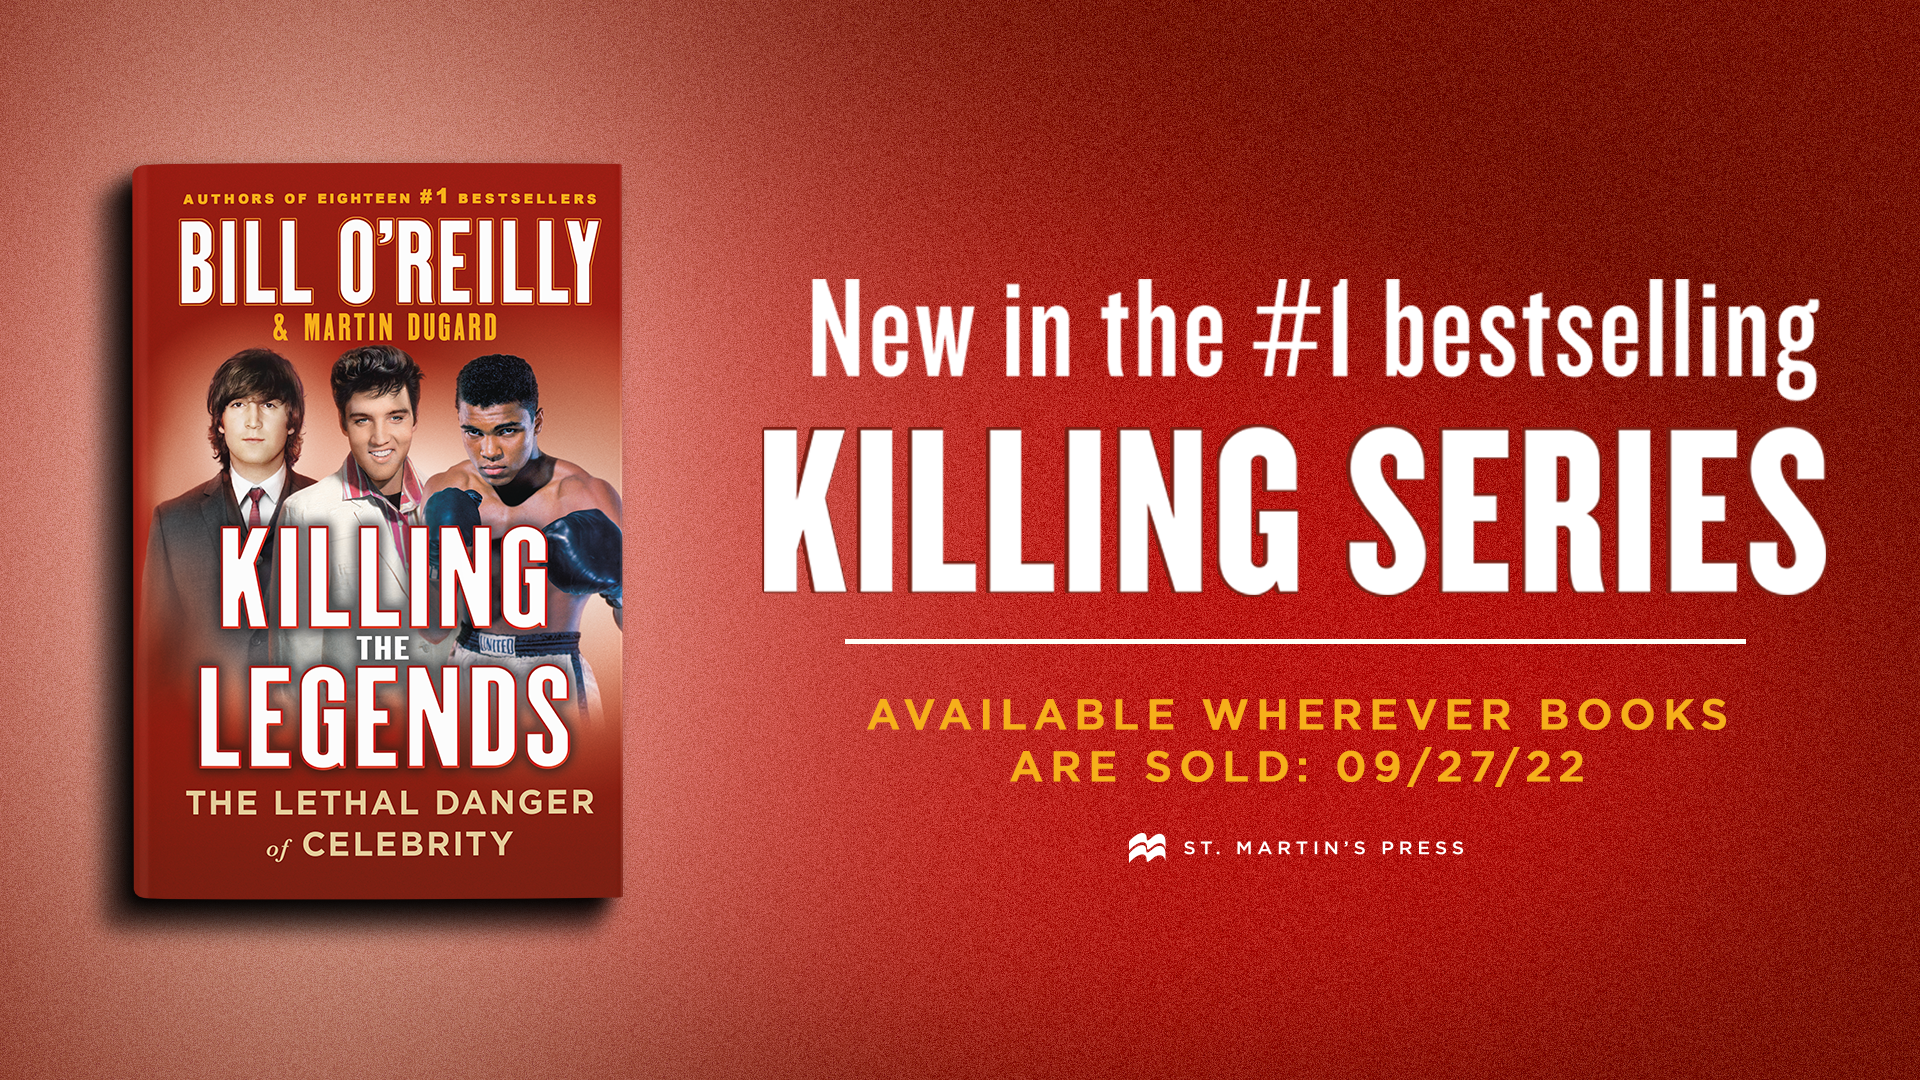 Listen to an Exclusive Audiobook Excerpt from 'Killing the Legends'